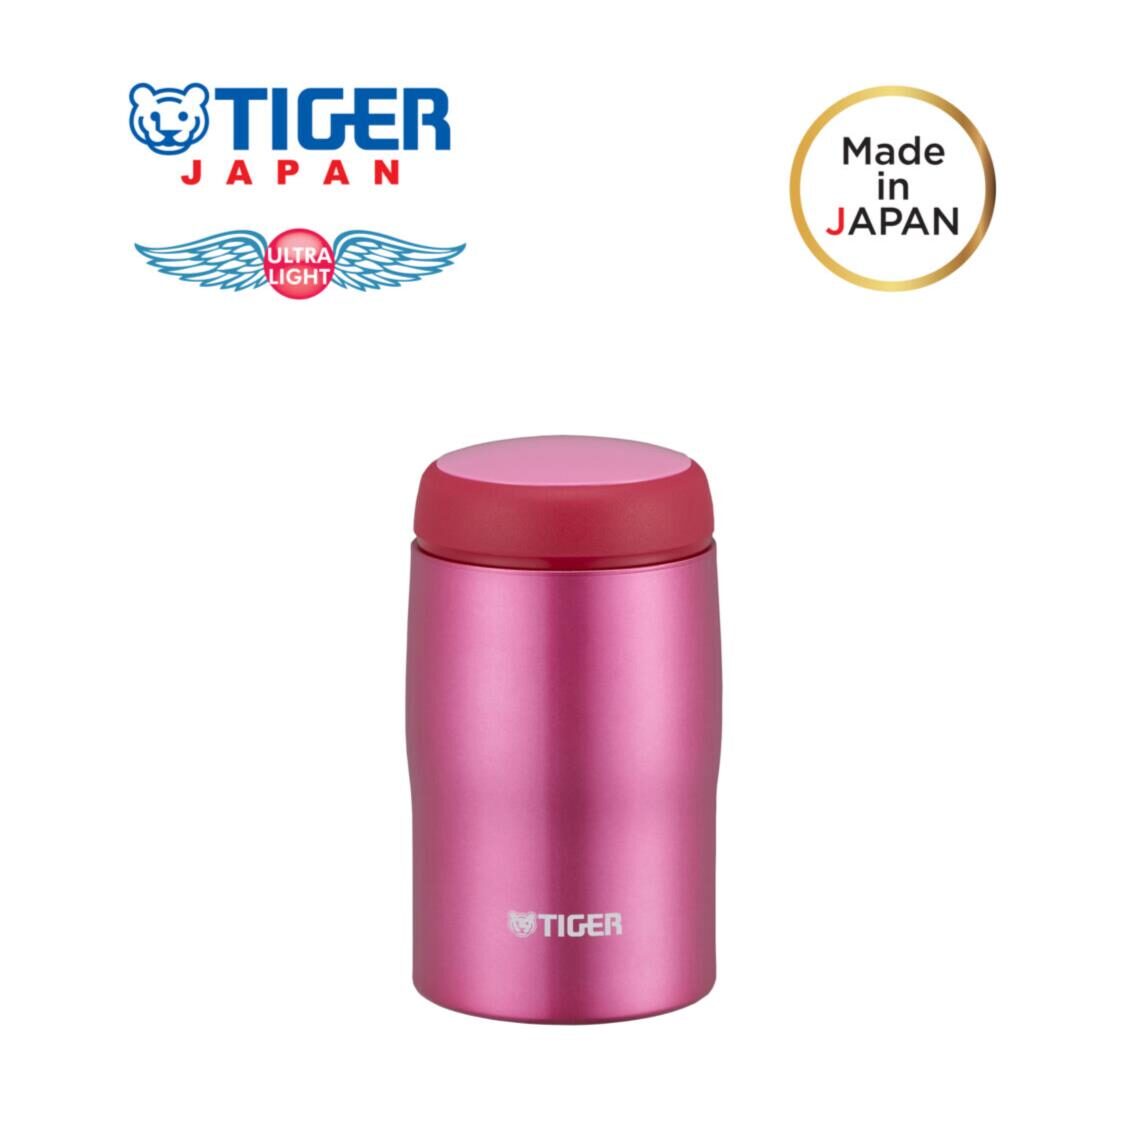 Tiger 240ml Double Stainless Steel Mug - Bright Pink Made in Japan MJA-B024 PB